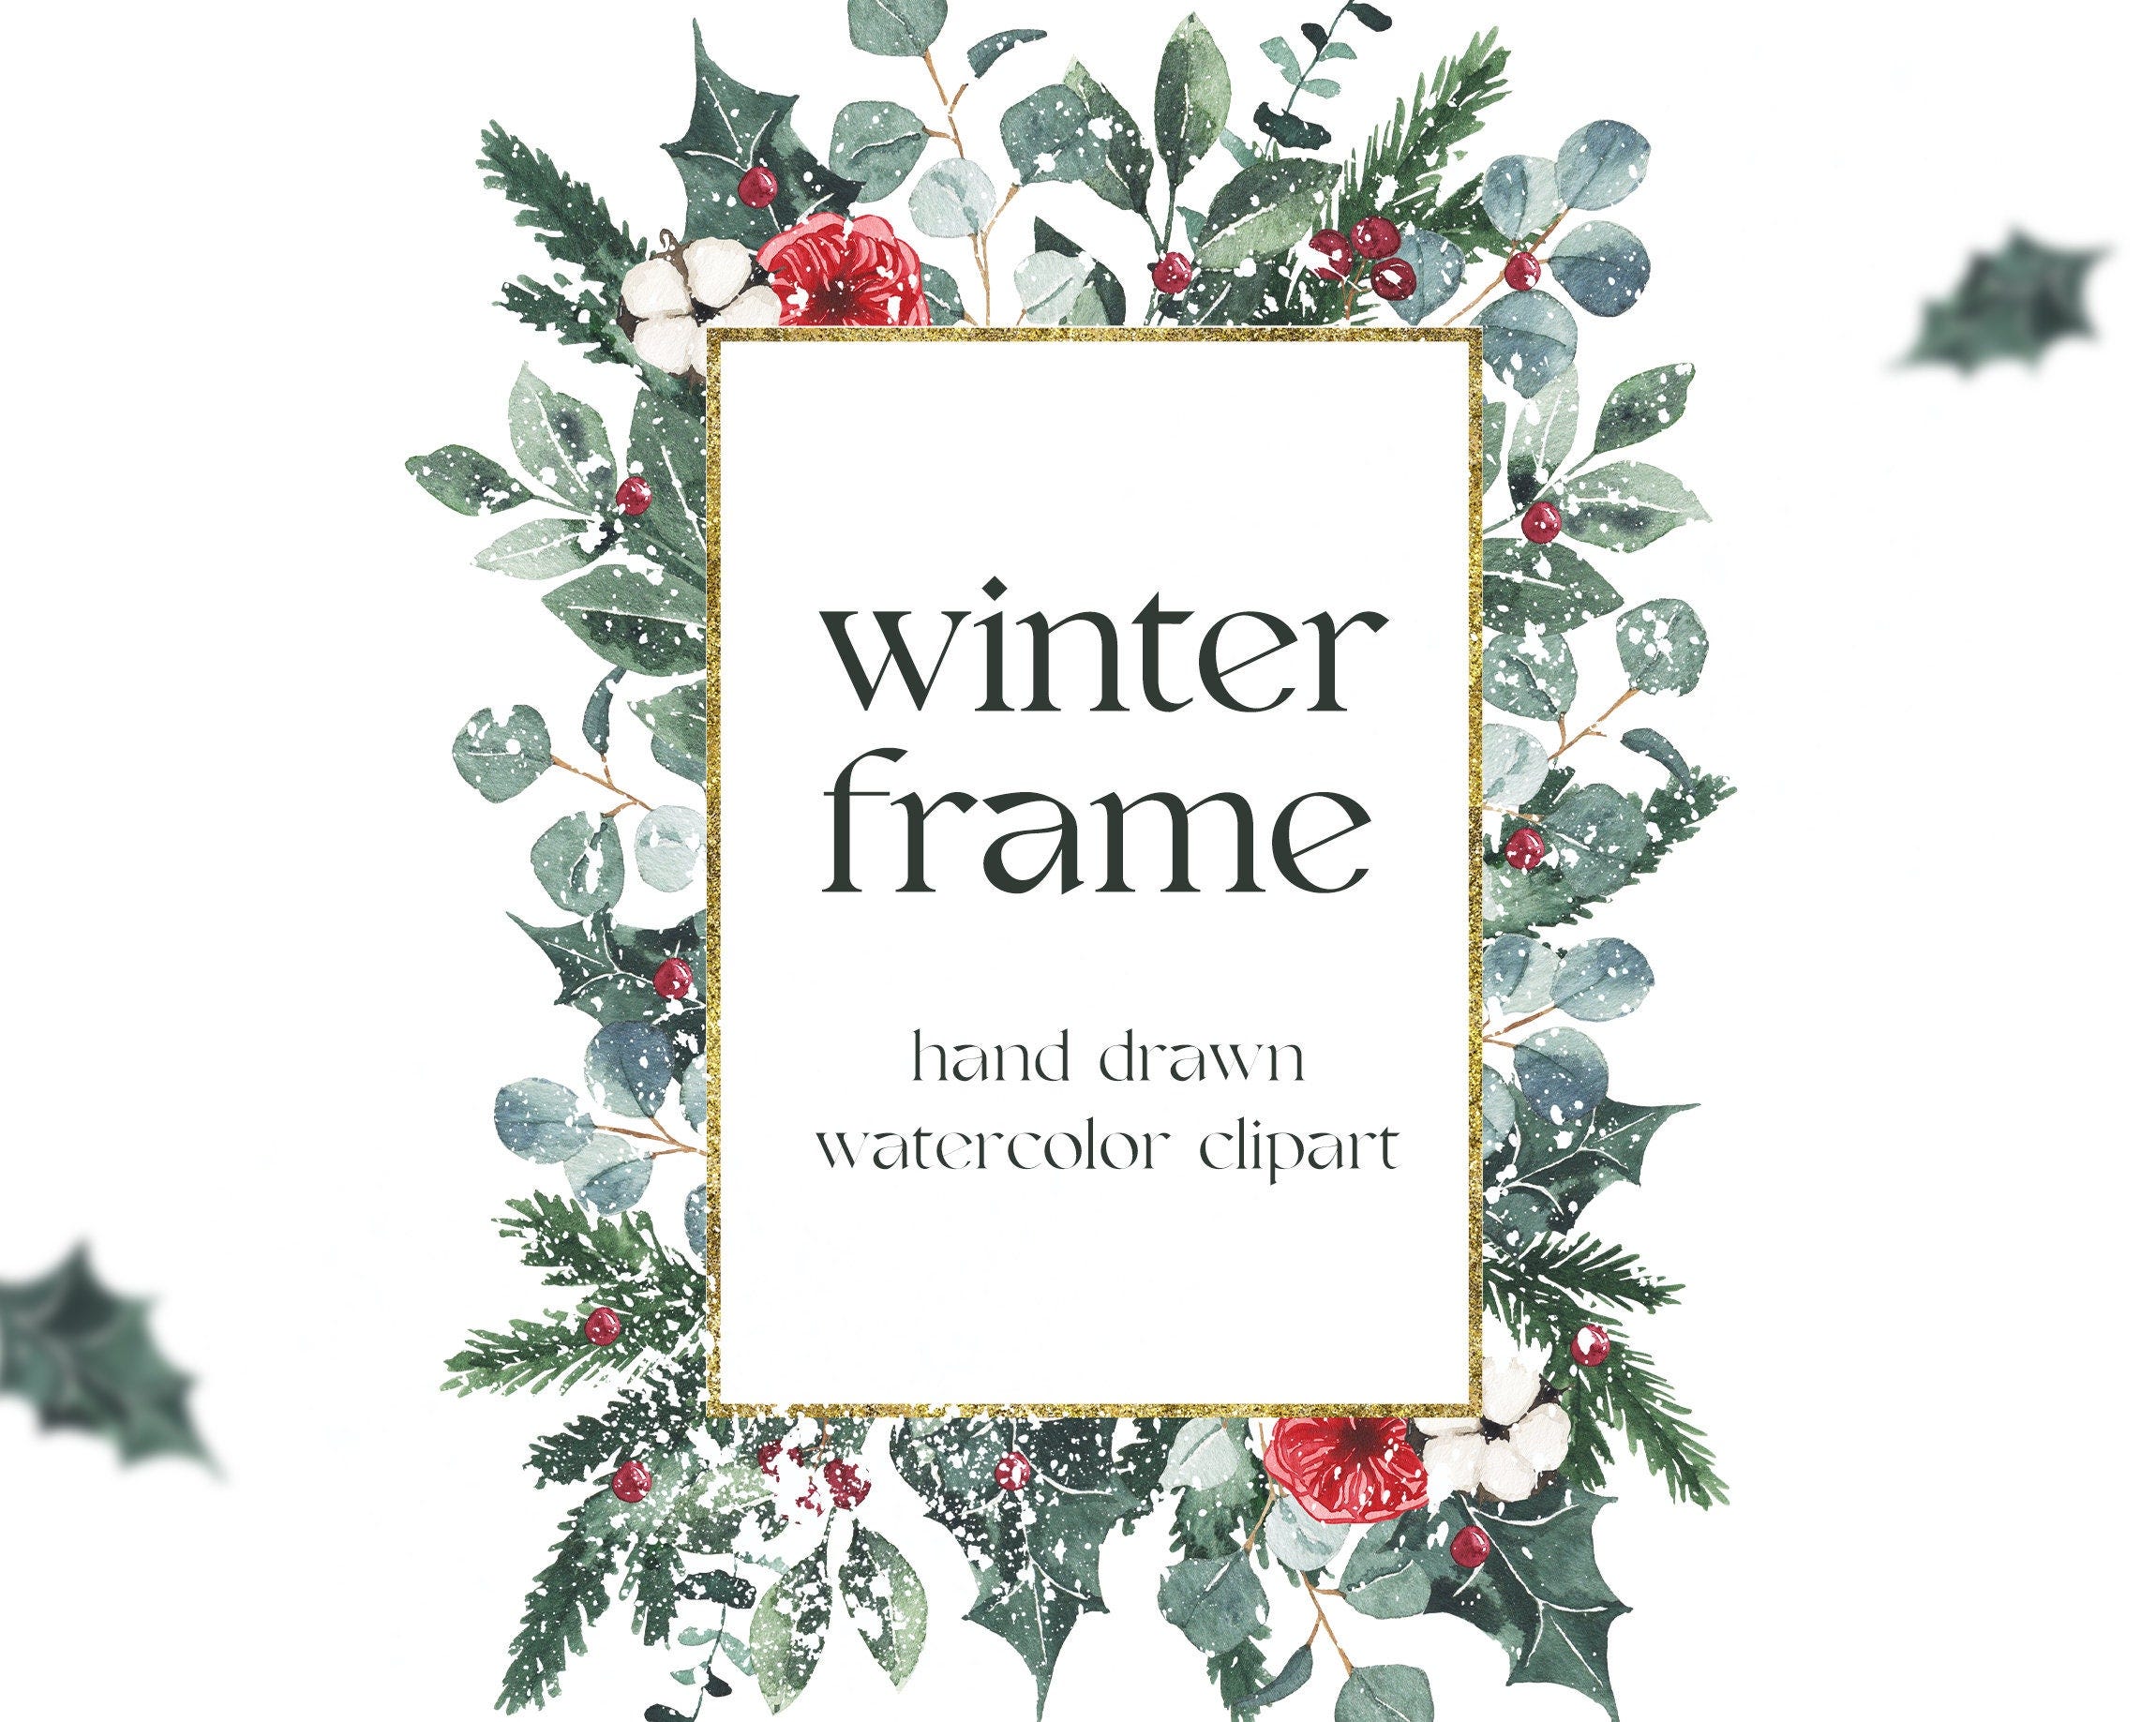 Watercolor winter floral frame clipart, Christmas frame clipart, borders clipart, gold frame, Winter greenery clipart, floral leaf frame